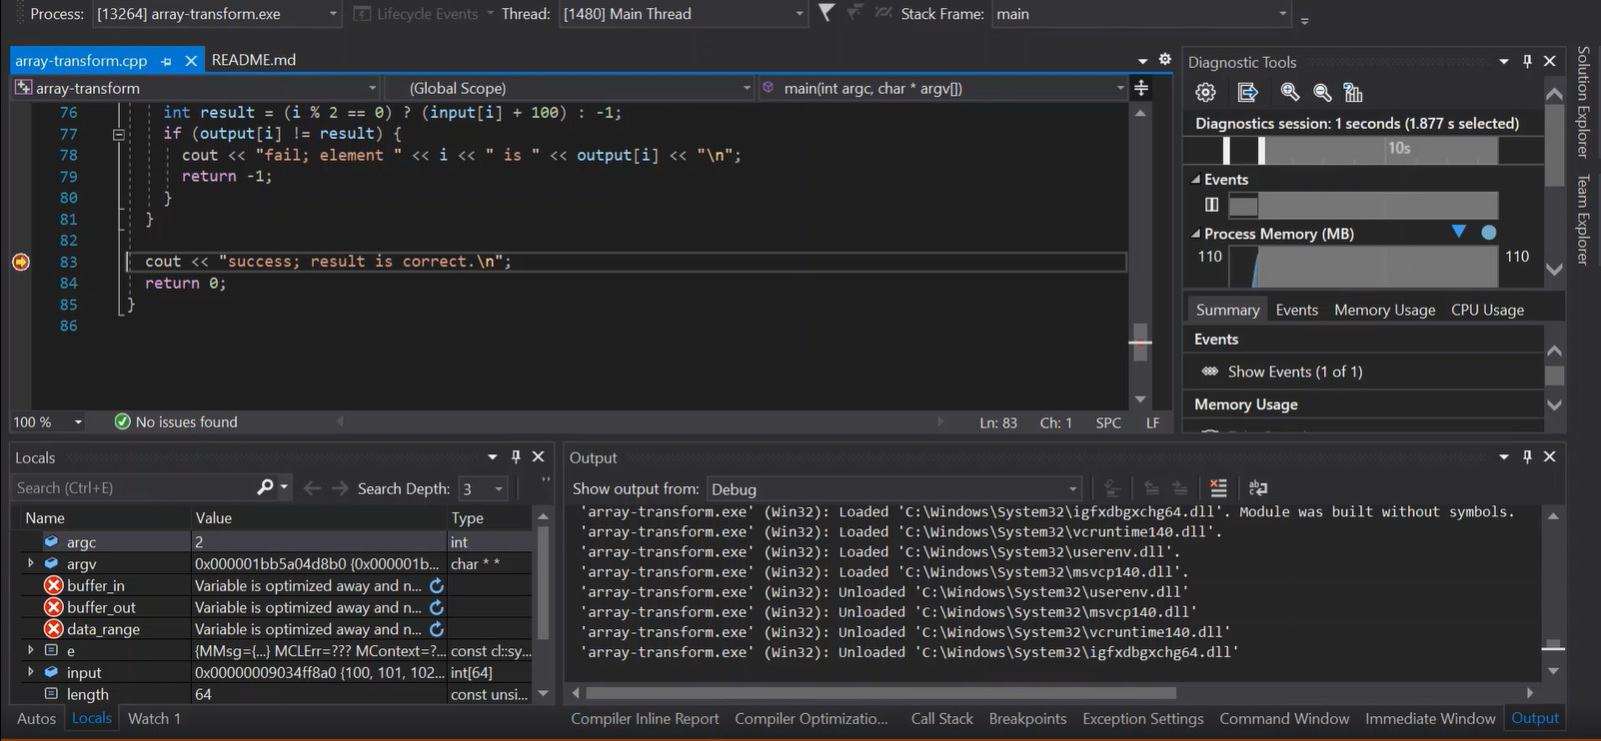 A screenshot of Microsoft Visual Studio showing example output when the debugger hits the breakpoint.